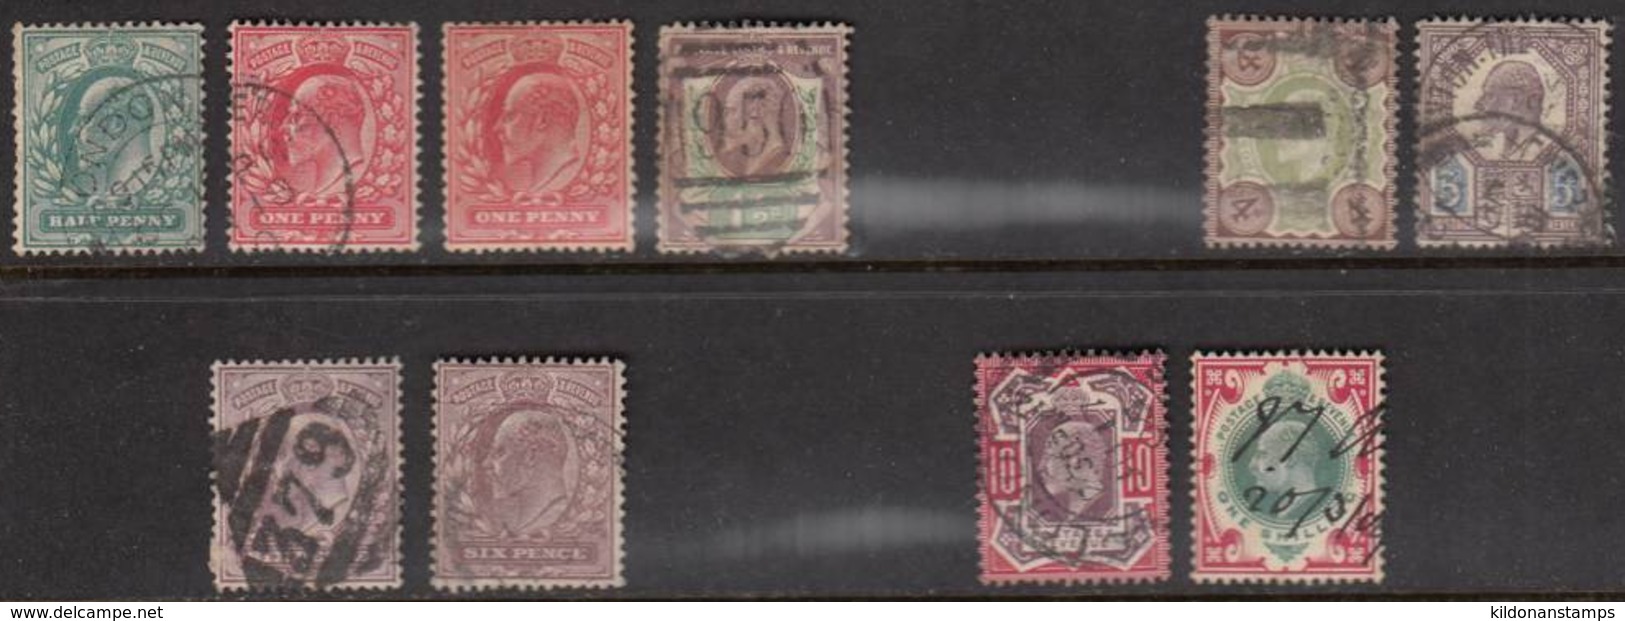 Great Britain 1902 Mint Mounted/cancelled, See Notes, Sc# 127-129,133-134,135a,135b,137a,140 (incl 128a) - Usados